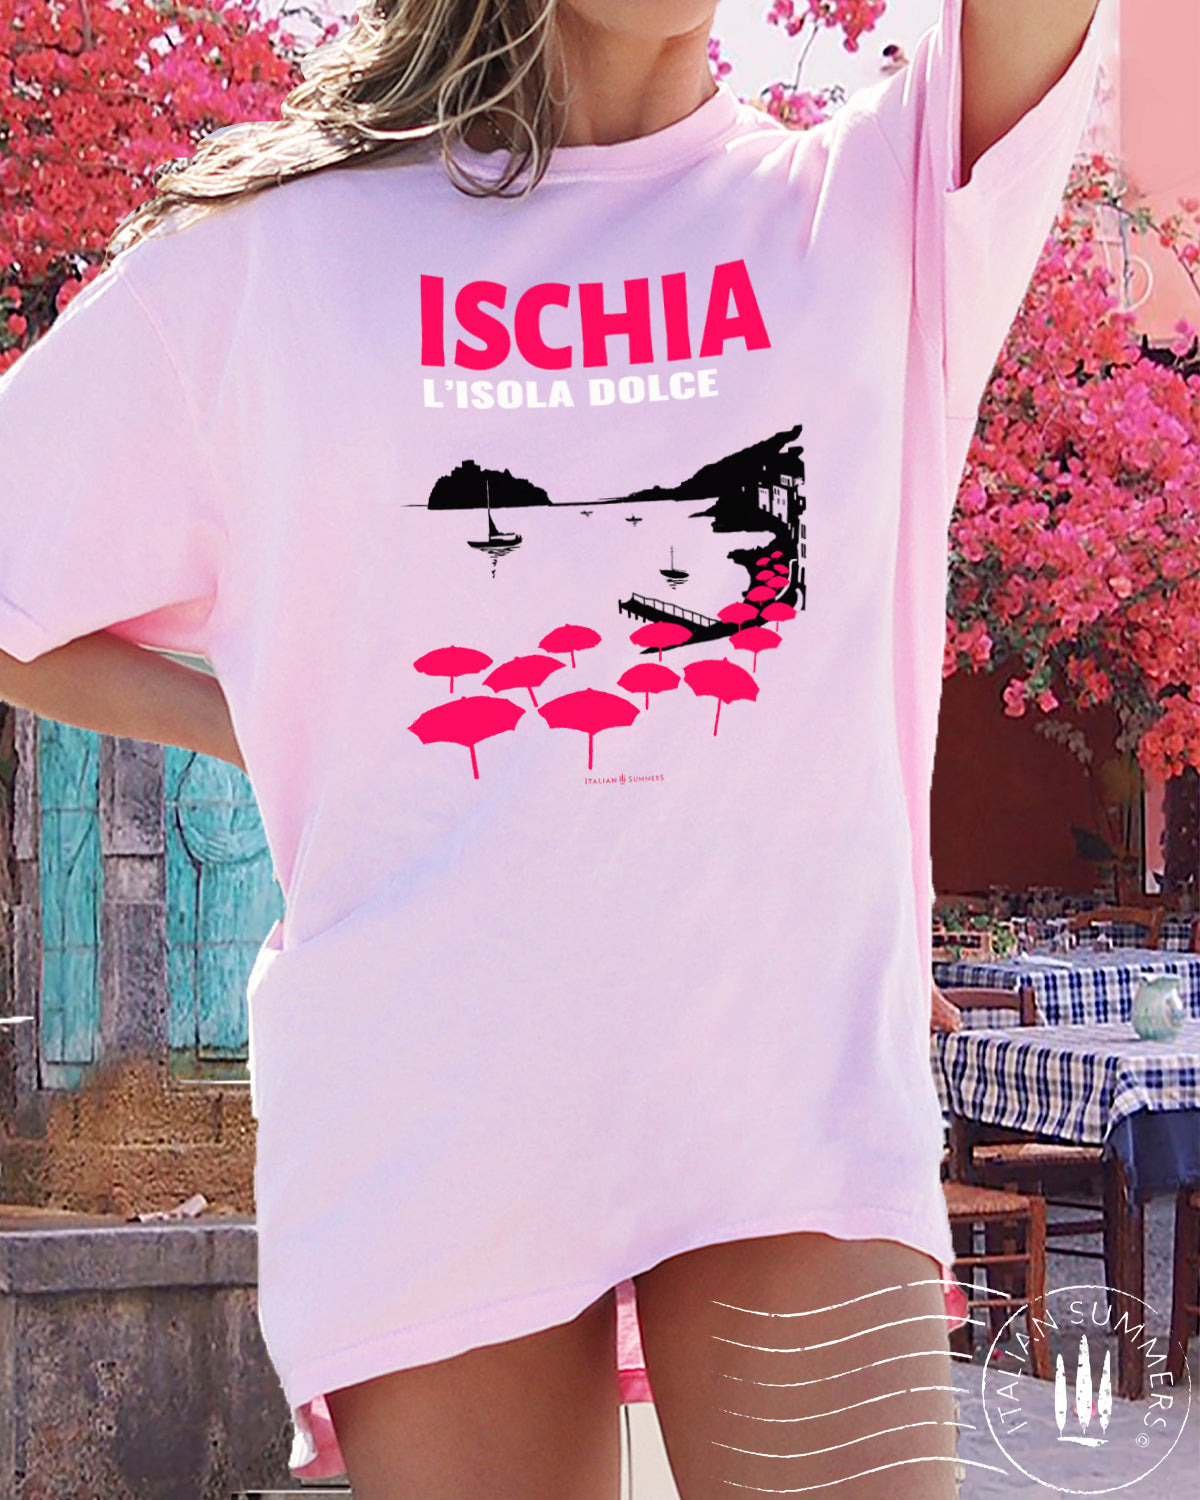 Italy Inspired garment dyed T Shirt with the text: ISCHIA L'isola dolce (Ischia, the sweet island)  with the print of the island's beach with the famous Aragonese Castle in the backround, with colored beach umbrellas strewn in the foreground. Made by Italian Summers